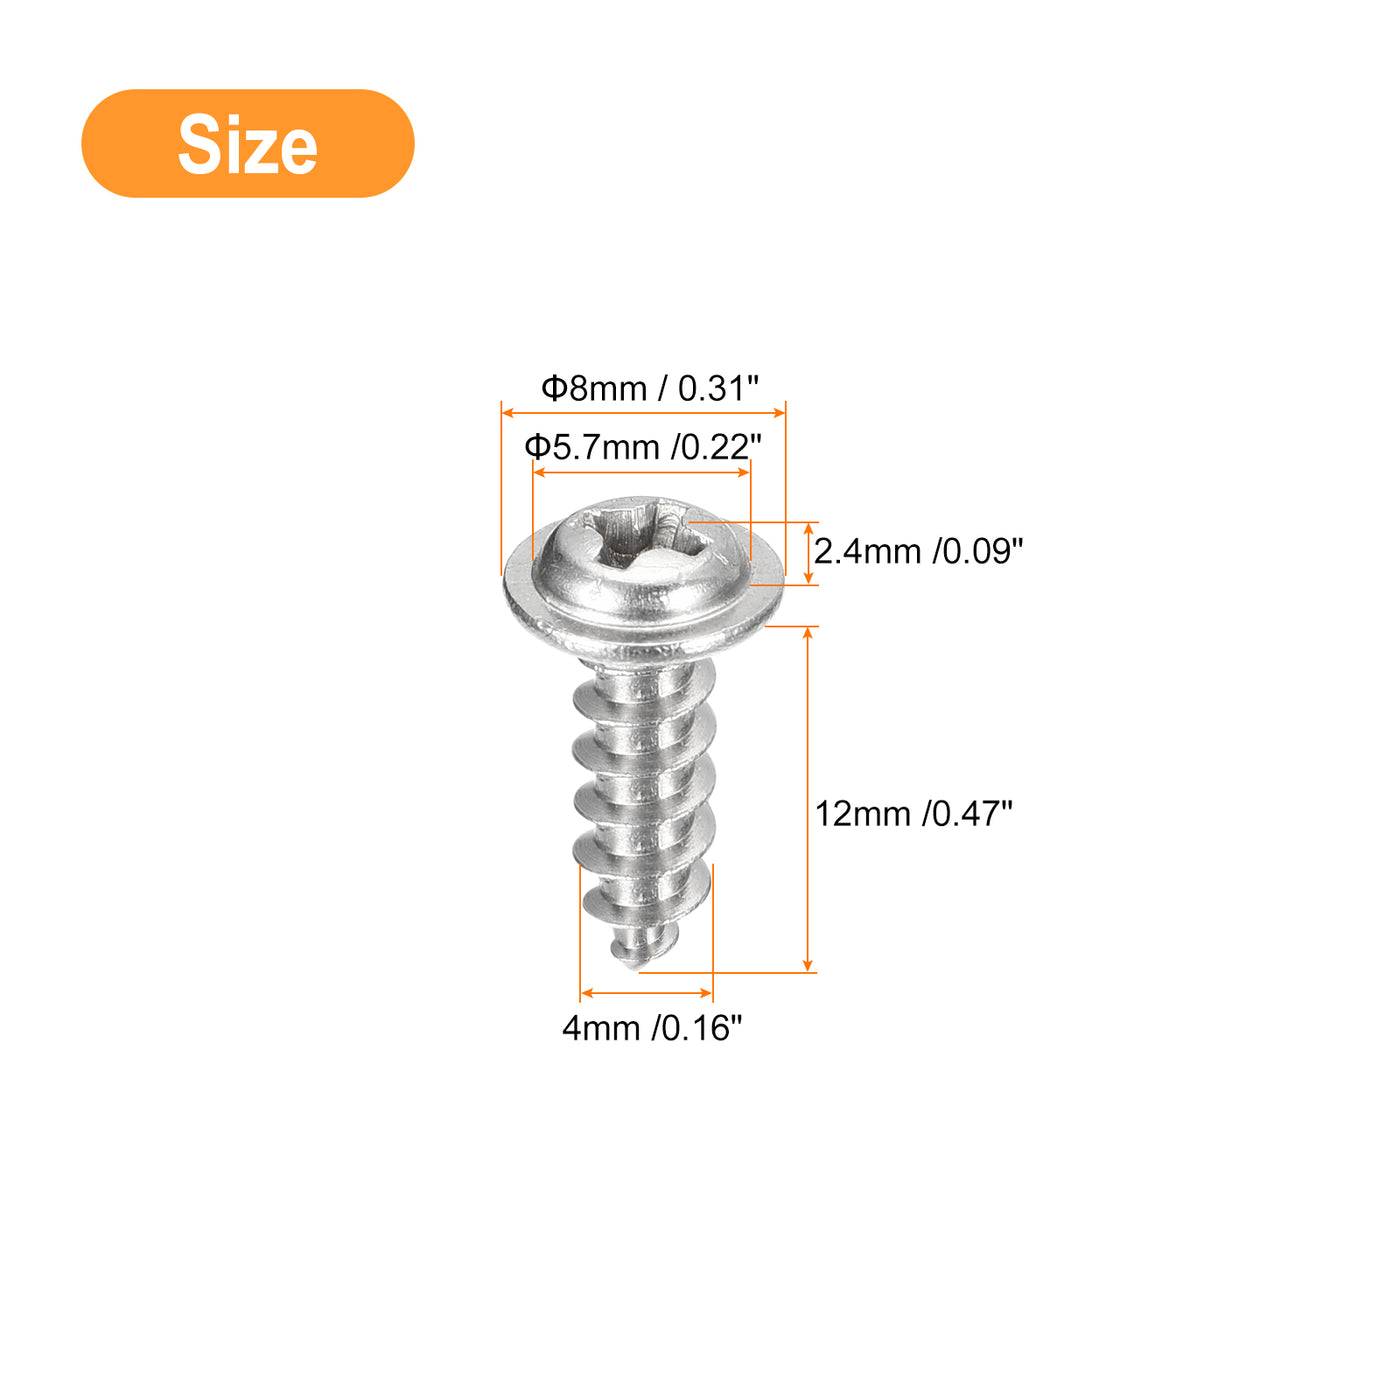 uxcell Uxcell ST4x12mm Phillips Pan Head Self-tapping Screw with Washer, 50pcs - 304 Stainless Steel Wood Screw Full Thread (Silver)